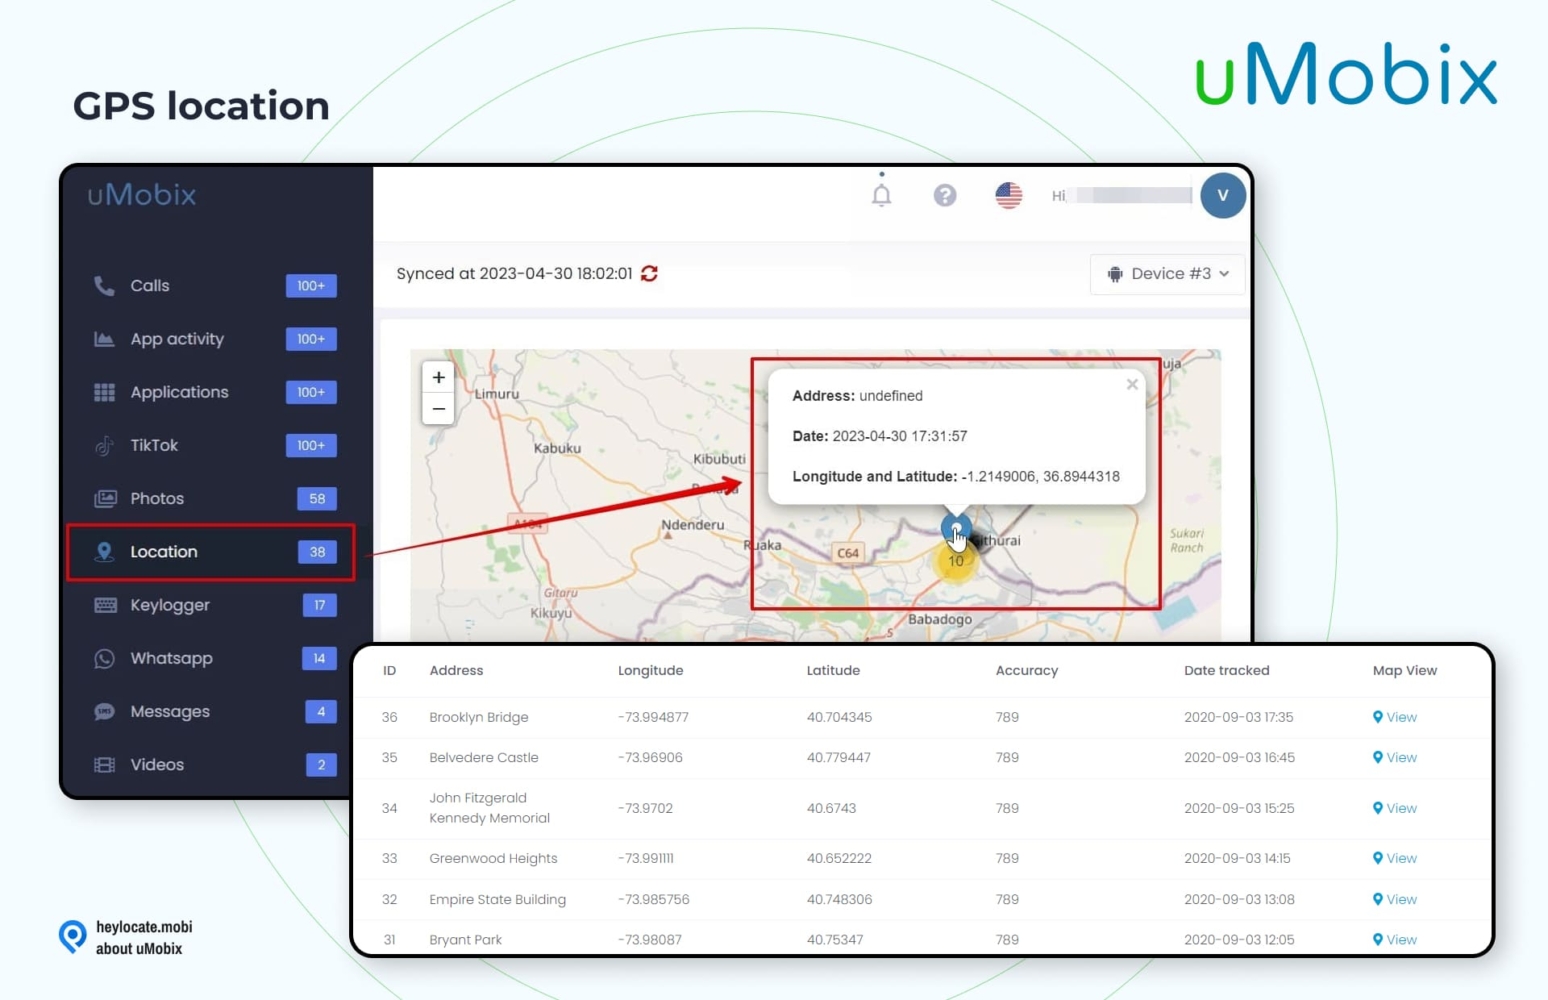 A screenshot of the GPS location tracking feature within the uMobix user interface. It shows a navigation panel on the left with 'Location' highlighted. On the right side is a detailed map that pinpoints a location with coordinates. Below the map, there's a table with columns for ID, Address, Longitude, Latitude, Accuracy, Date Tracked, and an option to view the location on the map, illustrating the app's precise location monitoring capabilities.